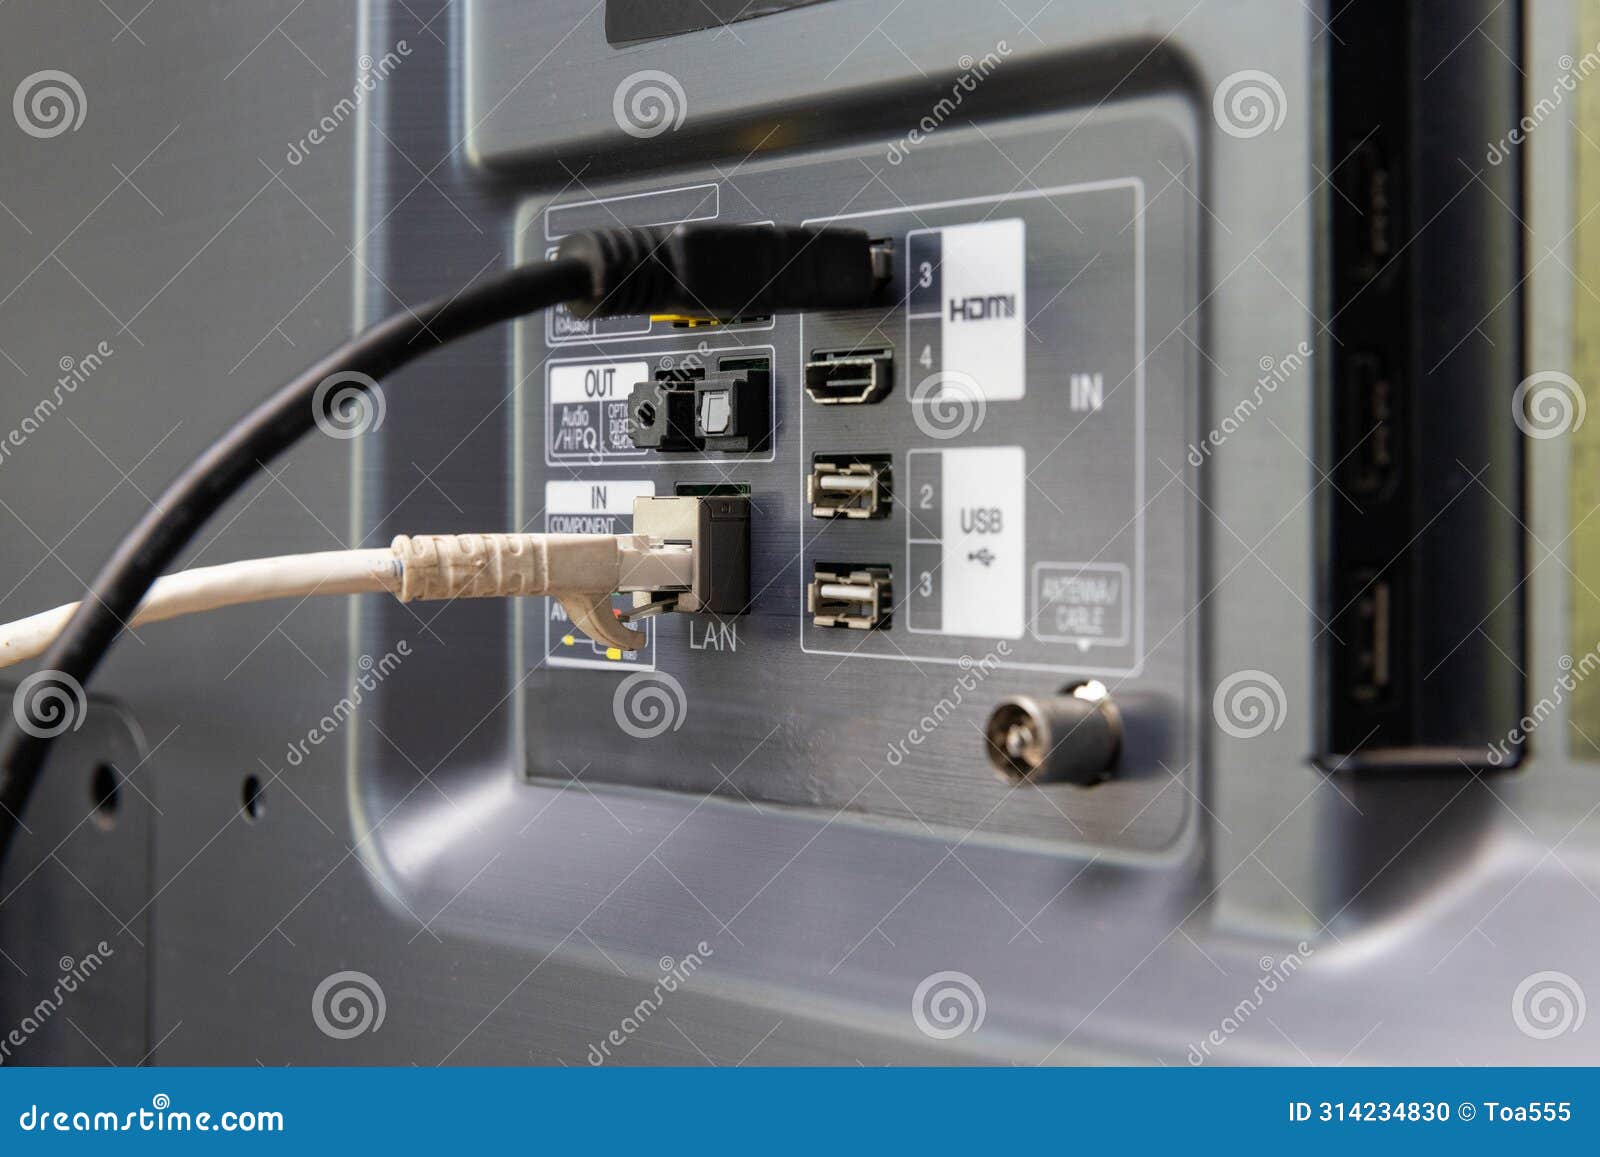 smart tv audio input and output connections (optical)